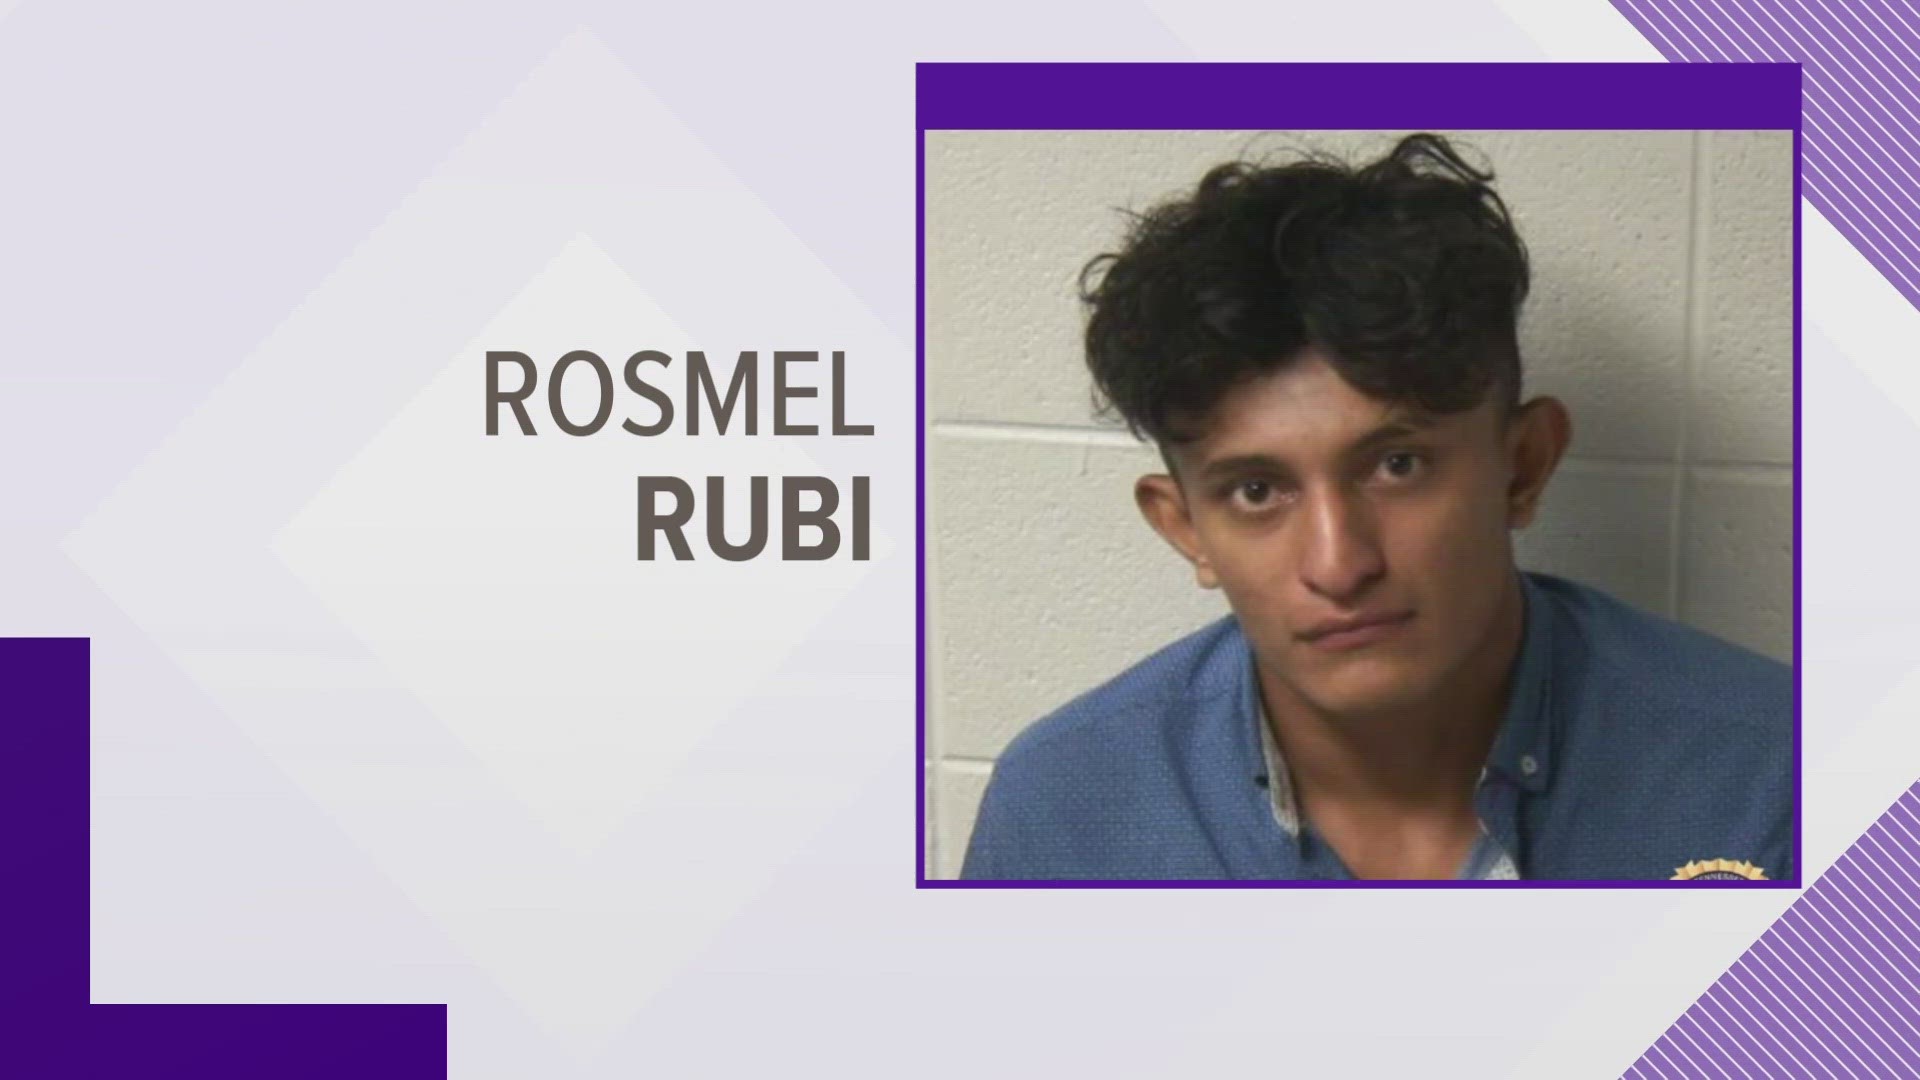 Rosmel Rubi was a suspect in a case where Gatlinburg authorities found a man's body, in Sept. 2022.